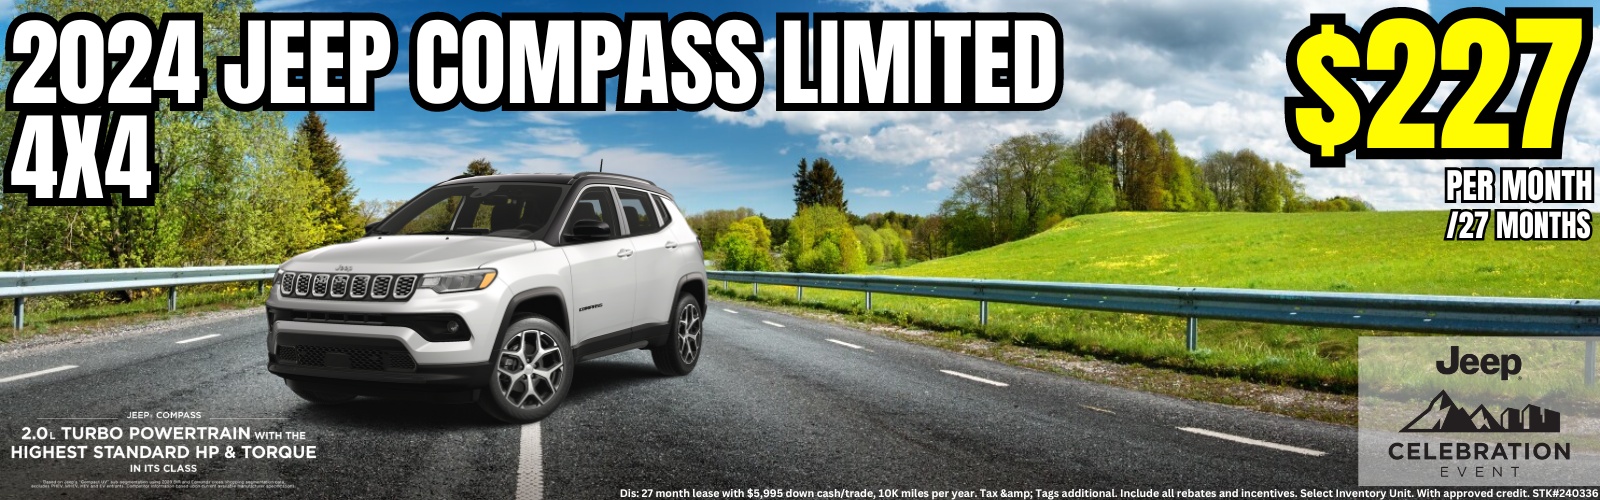 Compass Limited Lease Special